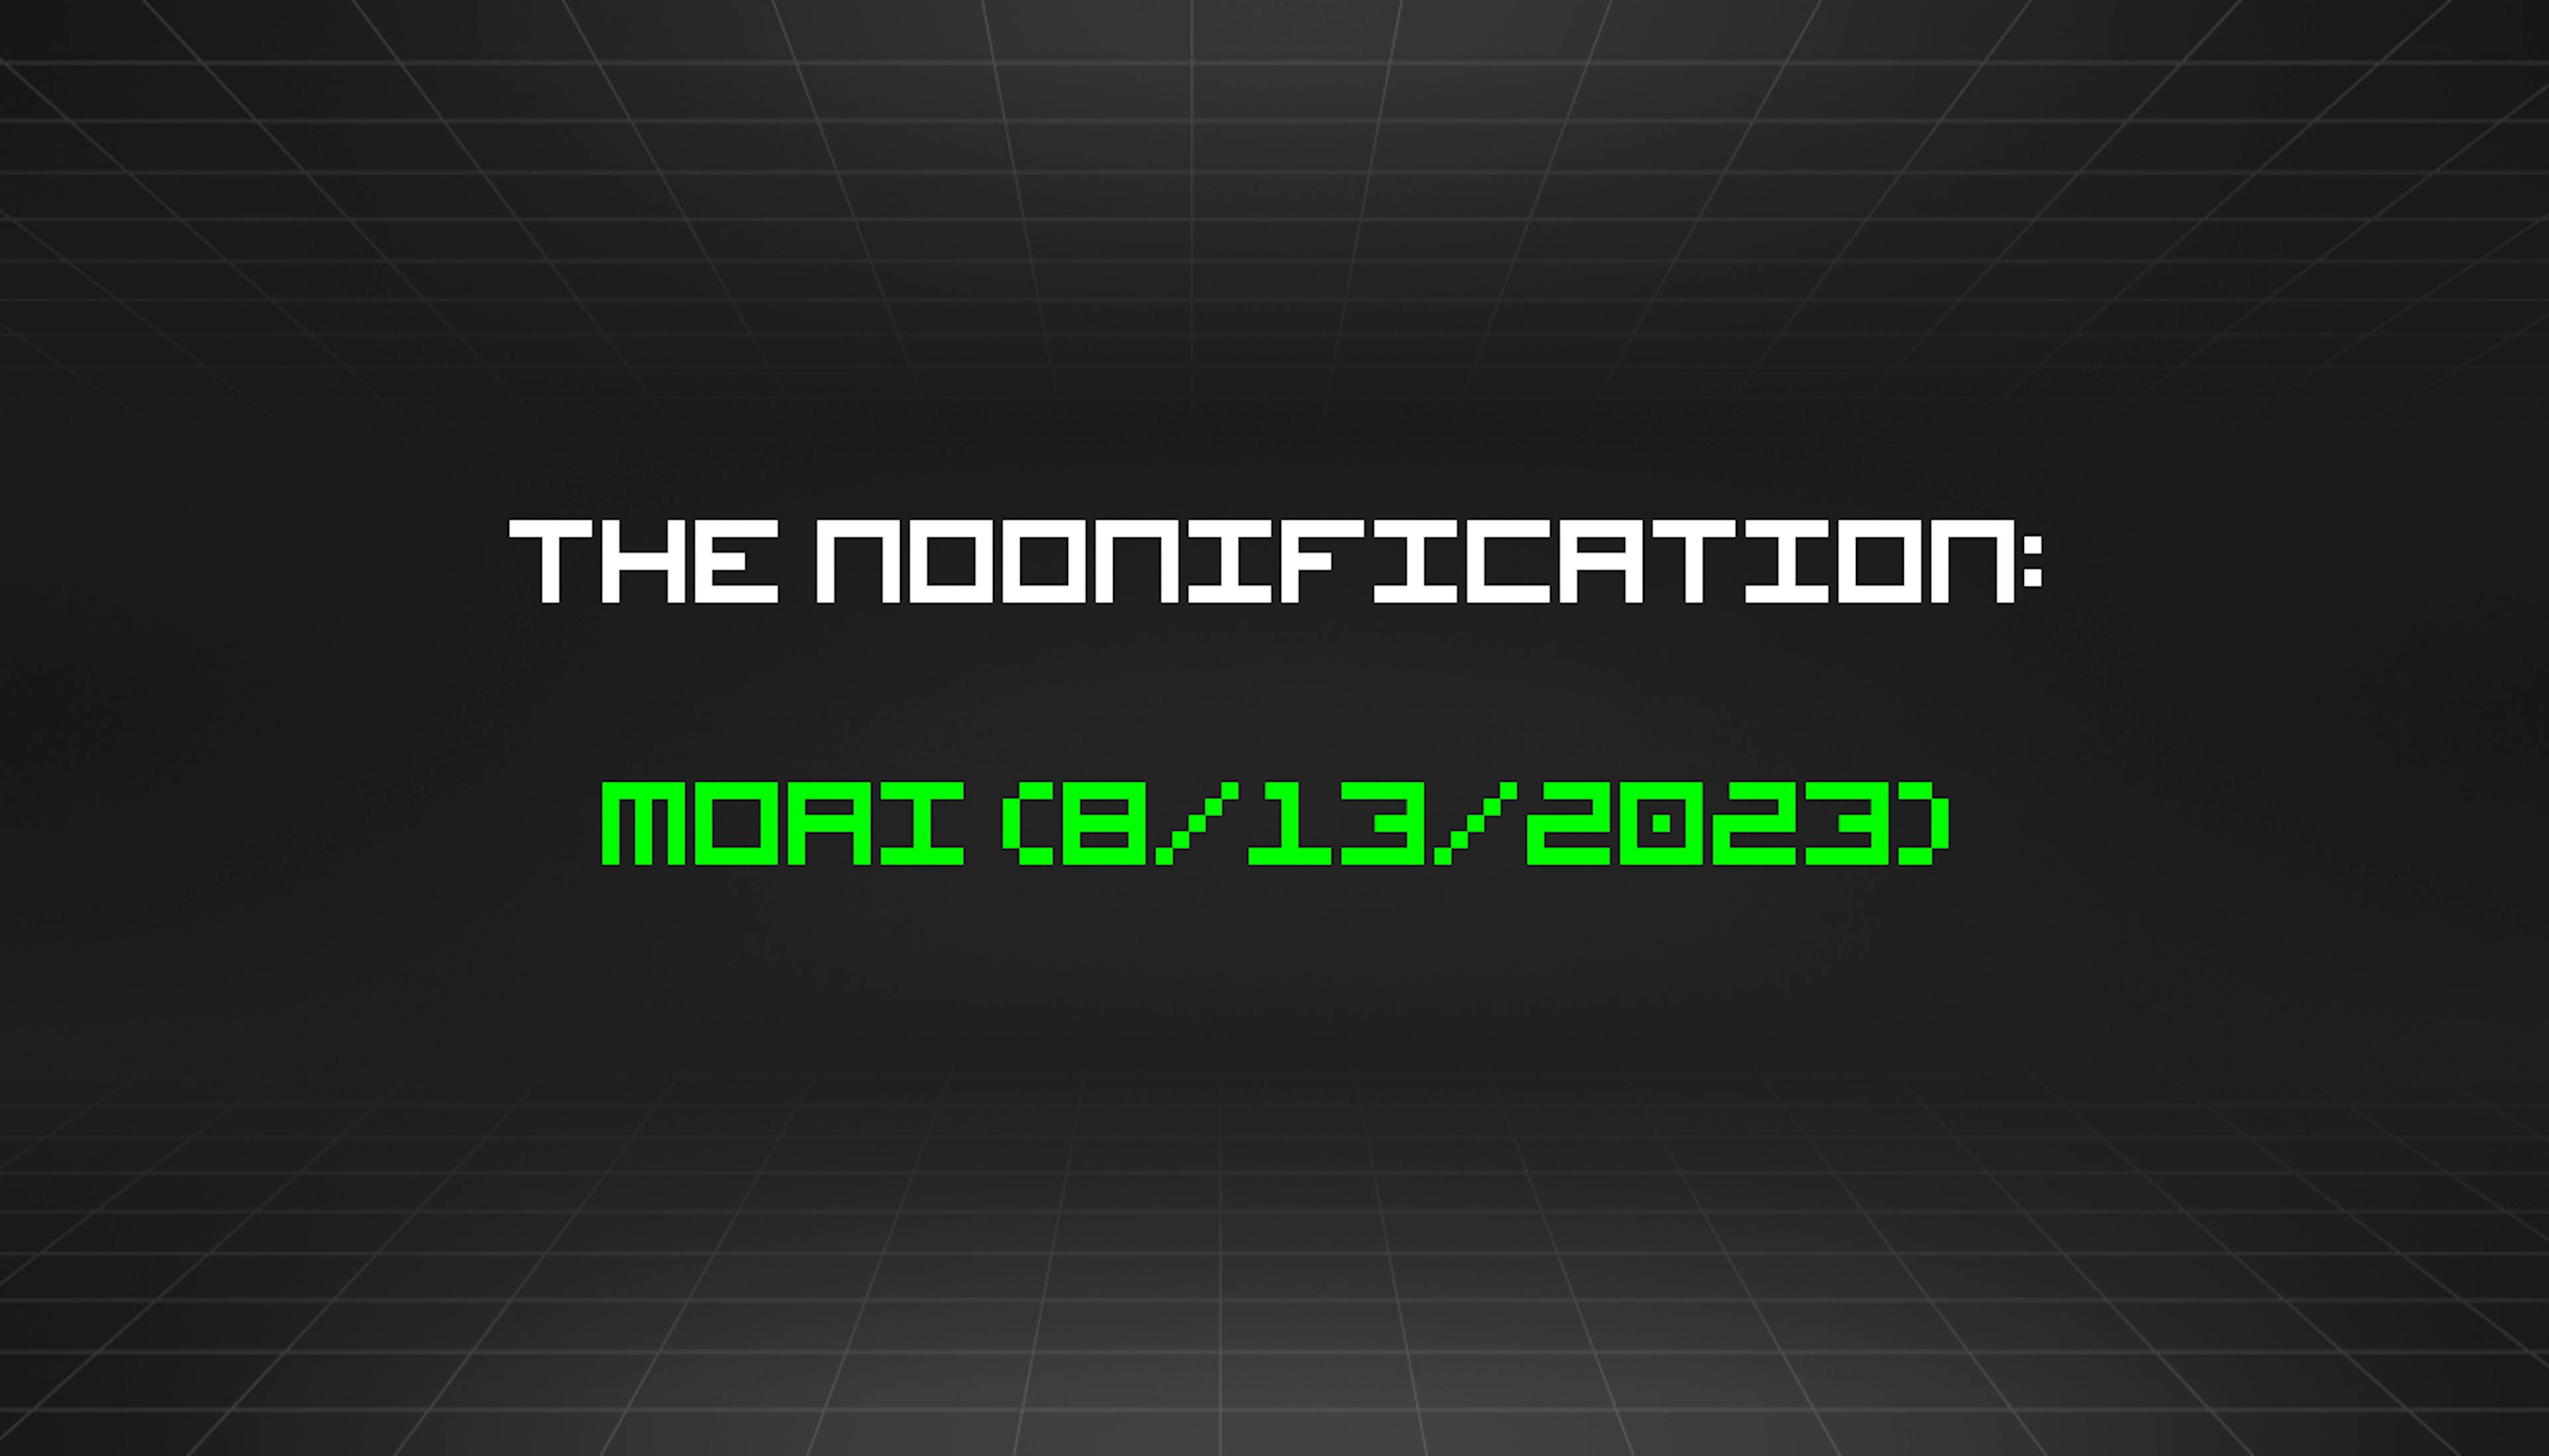 /8-13-2023-noonification feature image